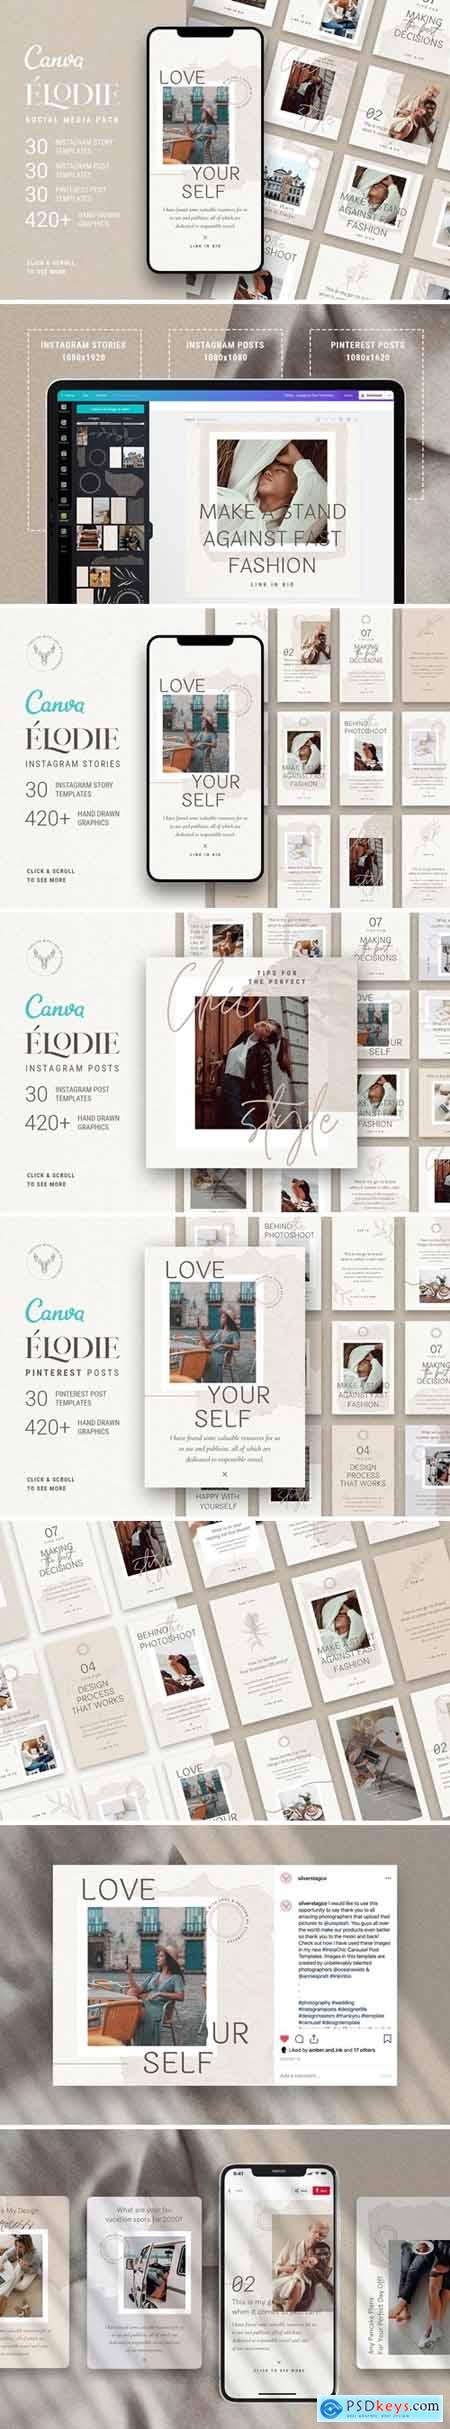 Elodie - Canva Social Templates Pack 4767084